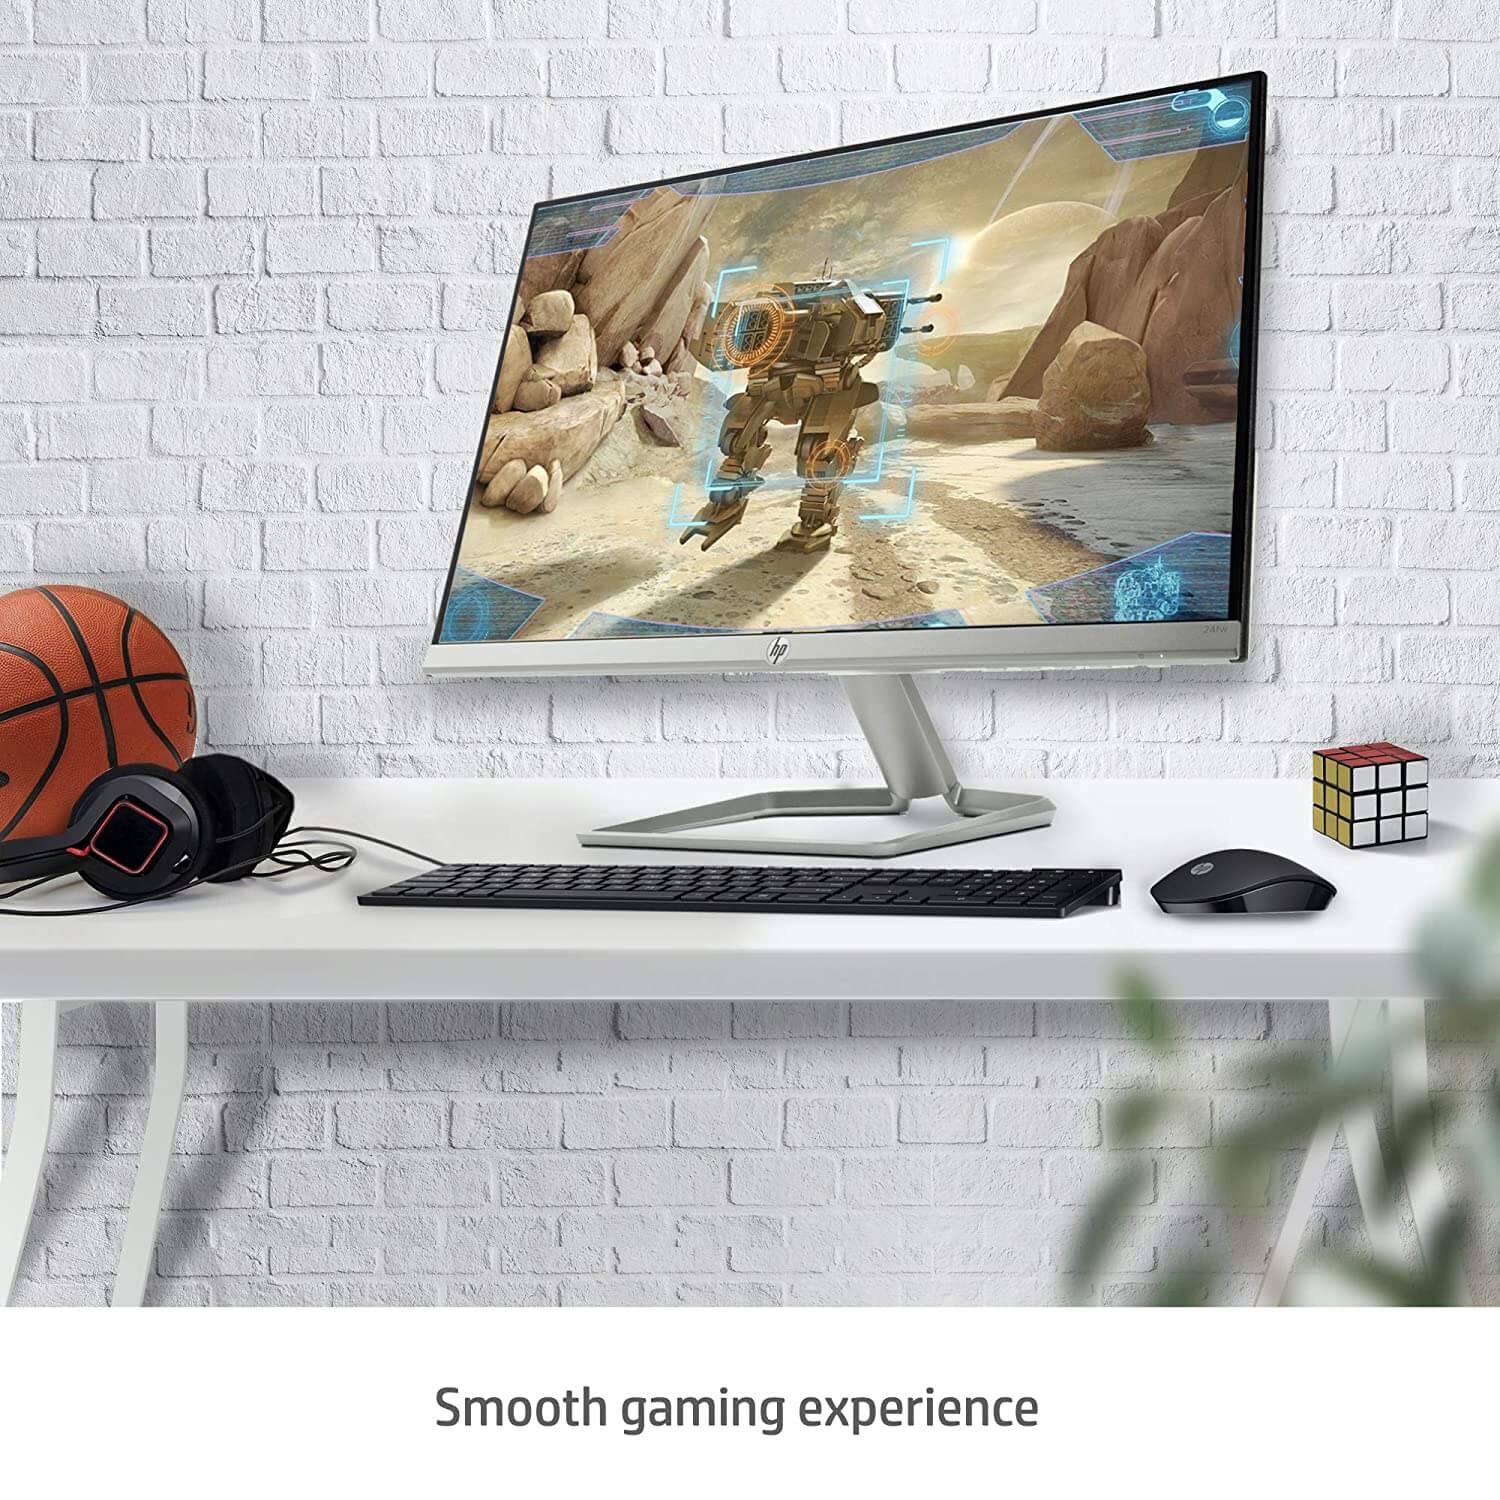 HP 27 inch 1080P Computer Monitor in Silver and Black, 27 Full HD (1920 x  1080) 75Hz Anti-Glare IPS Display with AMD FreeSync, 2 HDMI, 1 VGA, Highly